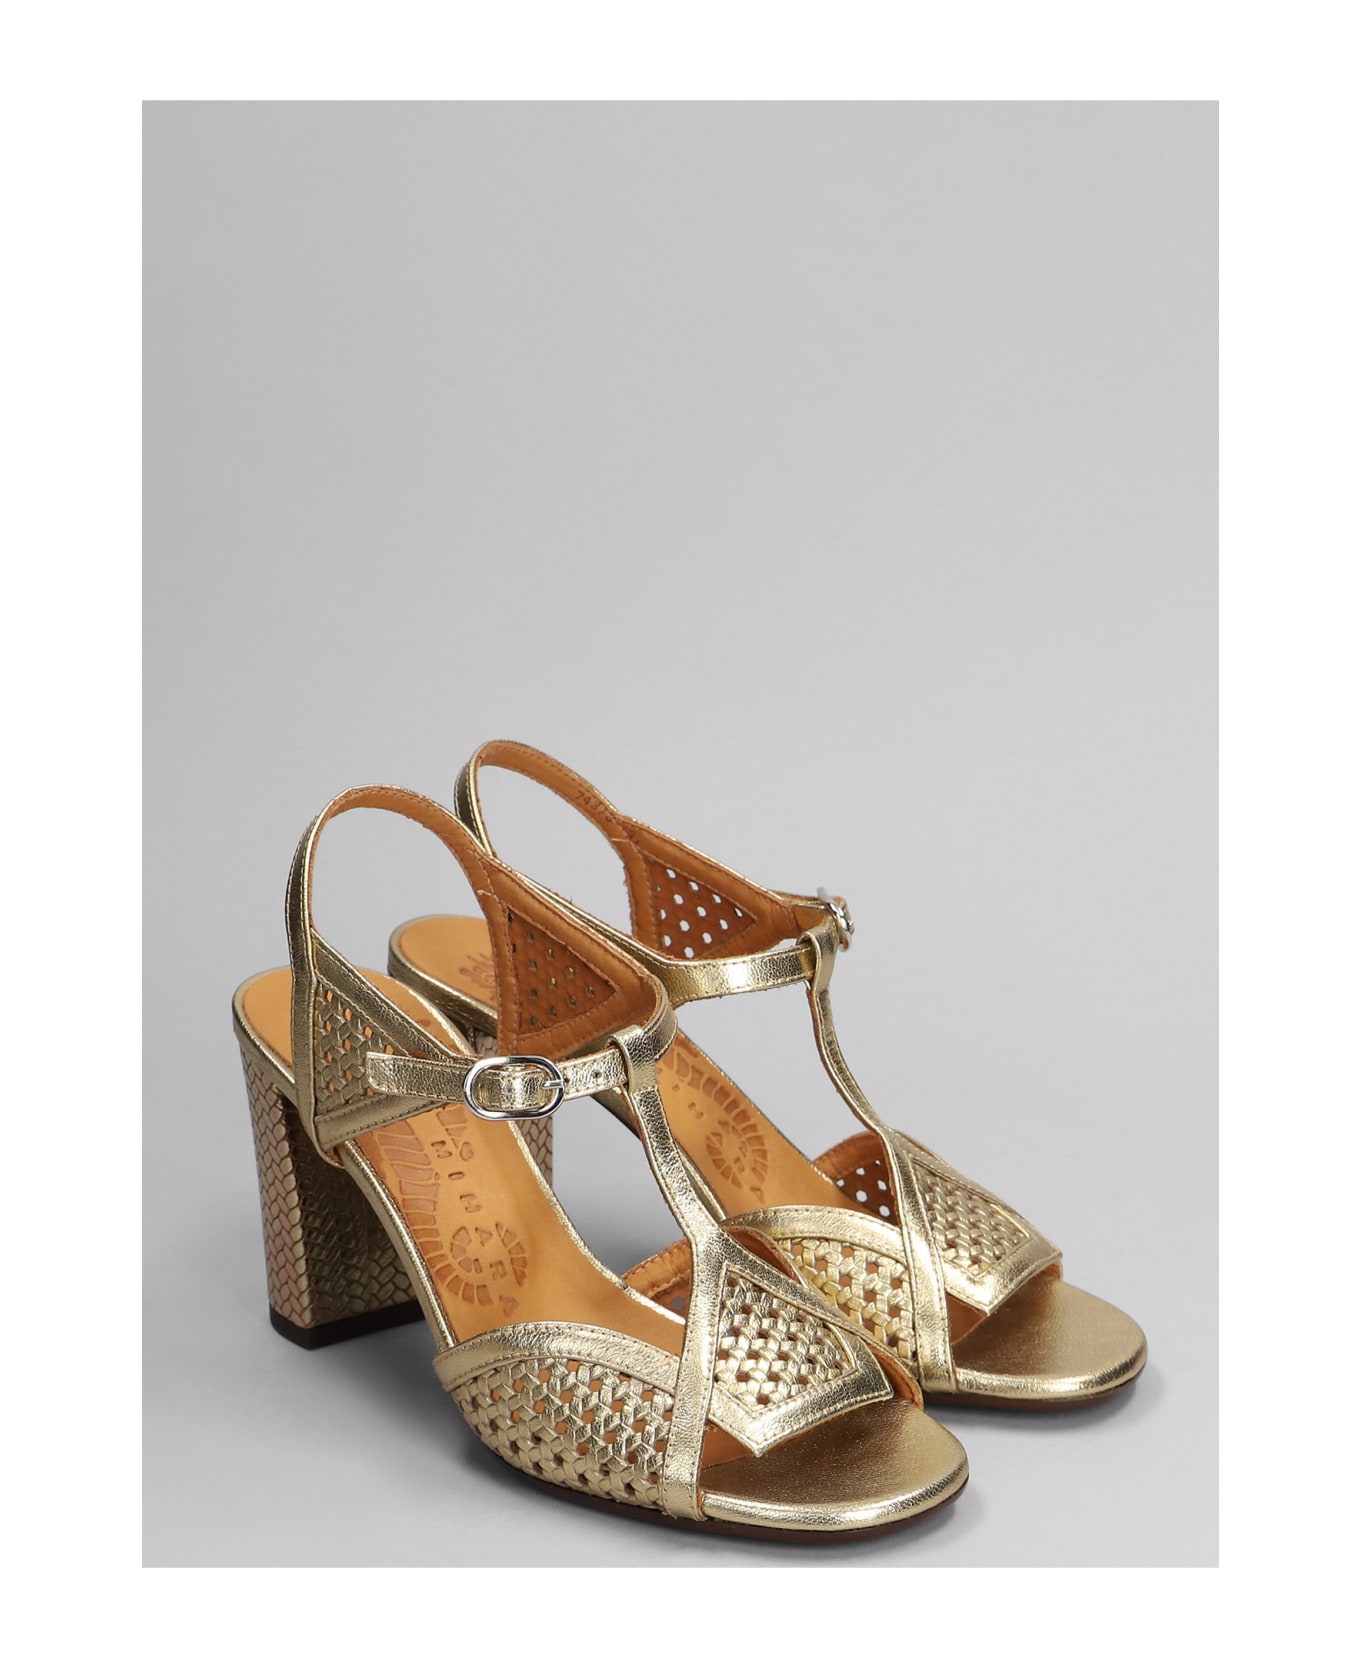 Chie Mihara Bessy Sandals In Gold Leather - gold サンダル